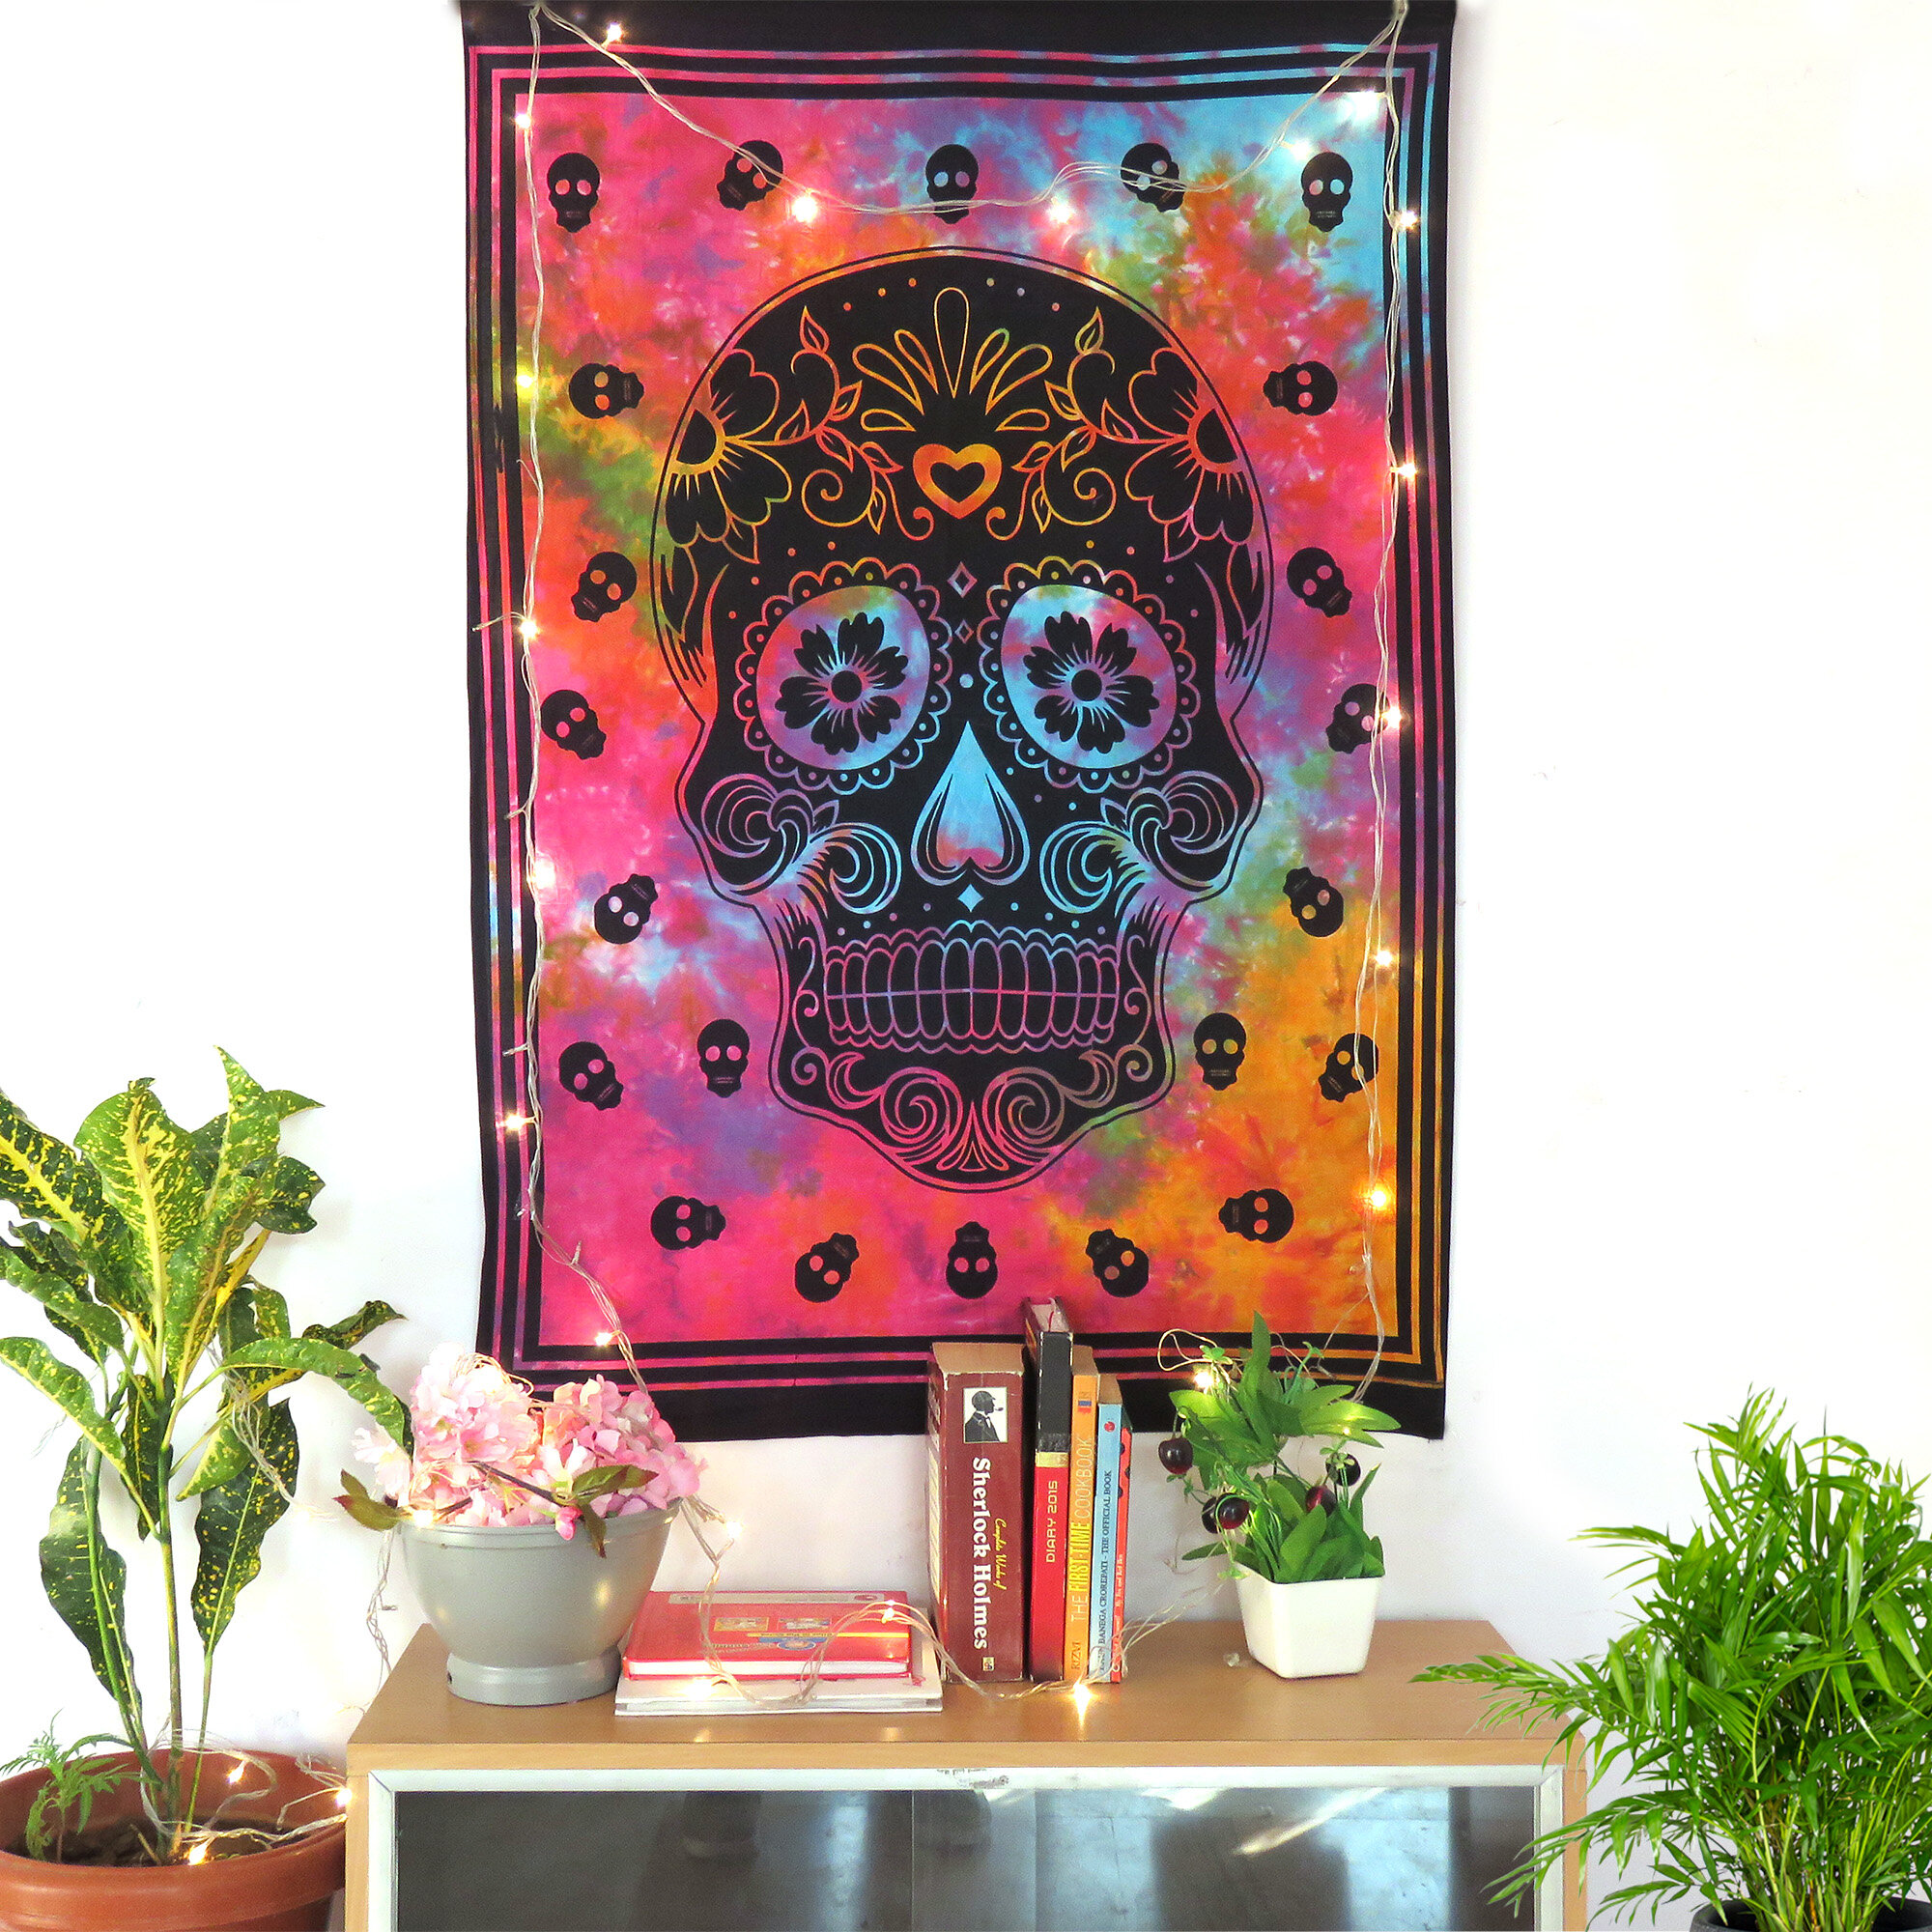 Cotton Floral Skull Tapestry Wall Hanging Poster Indian Home Decor Wall Posters 